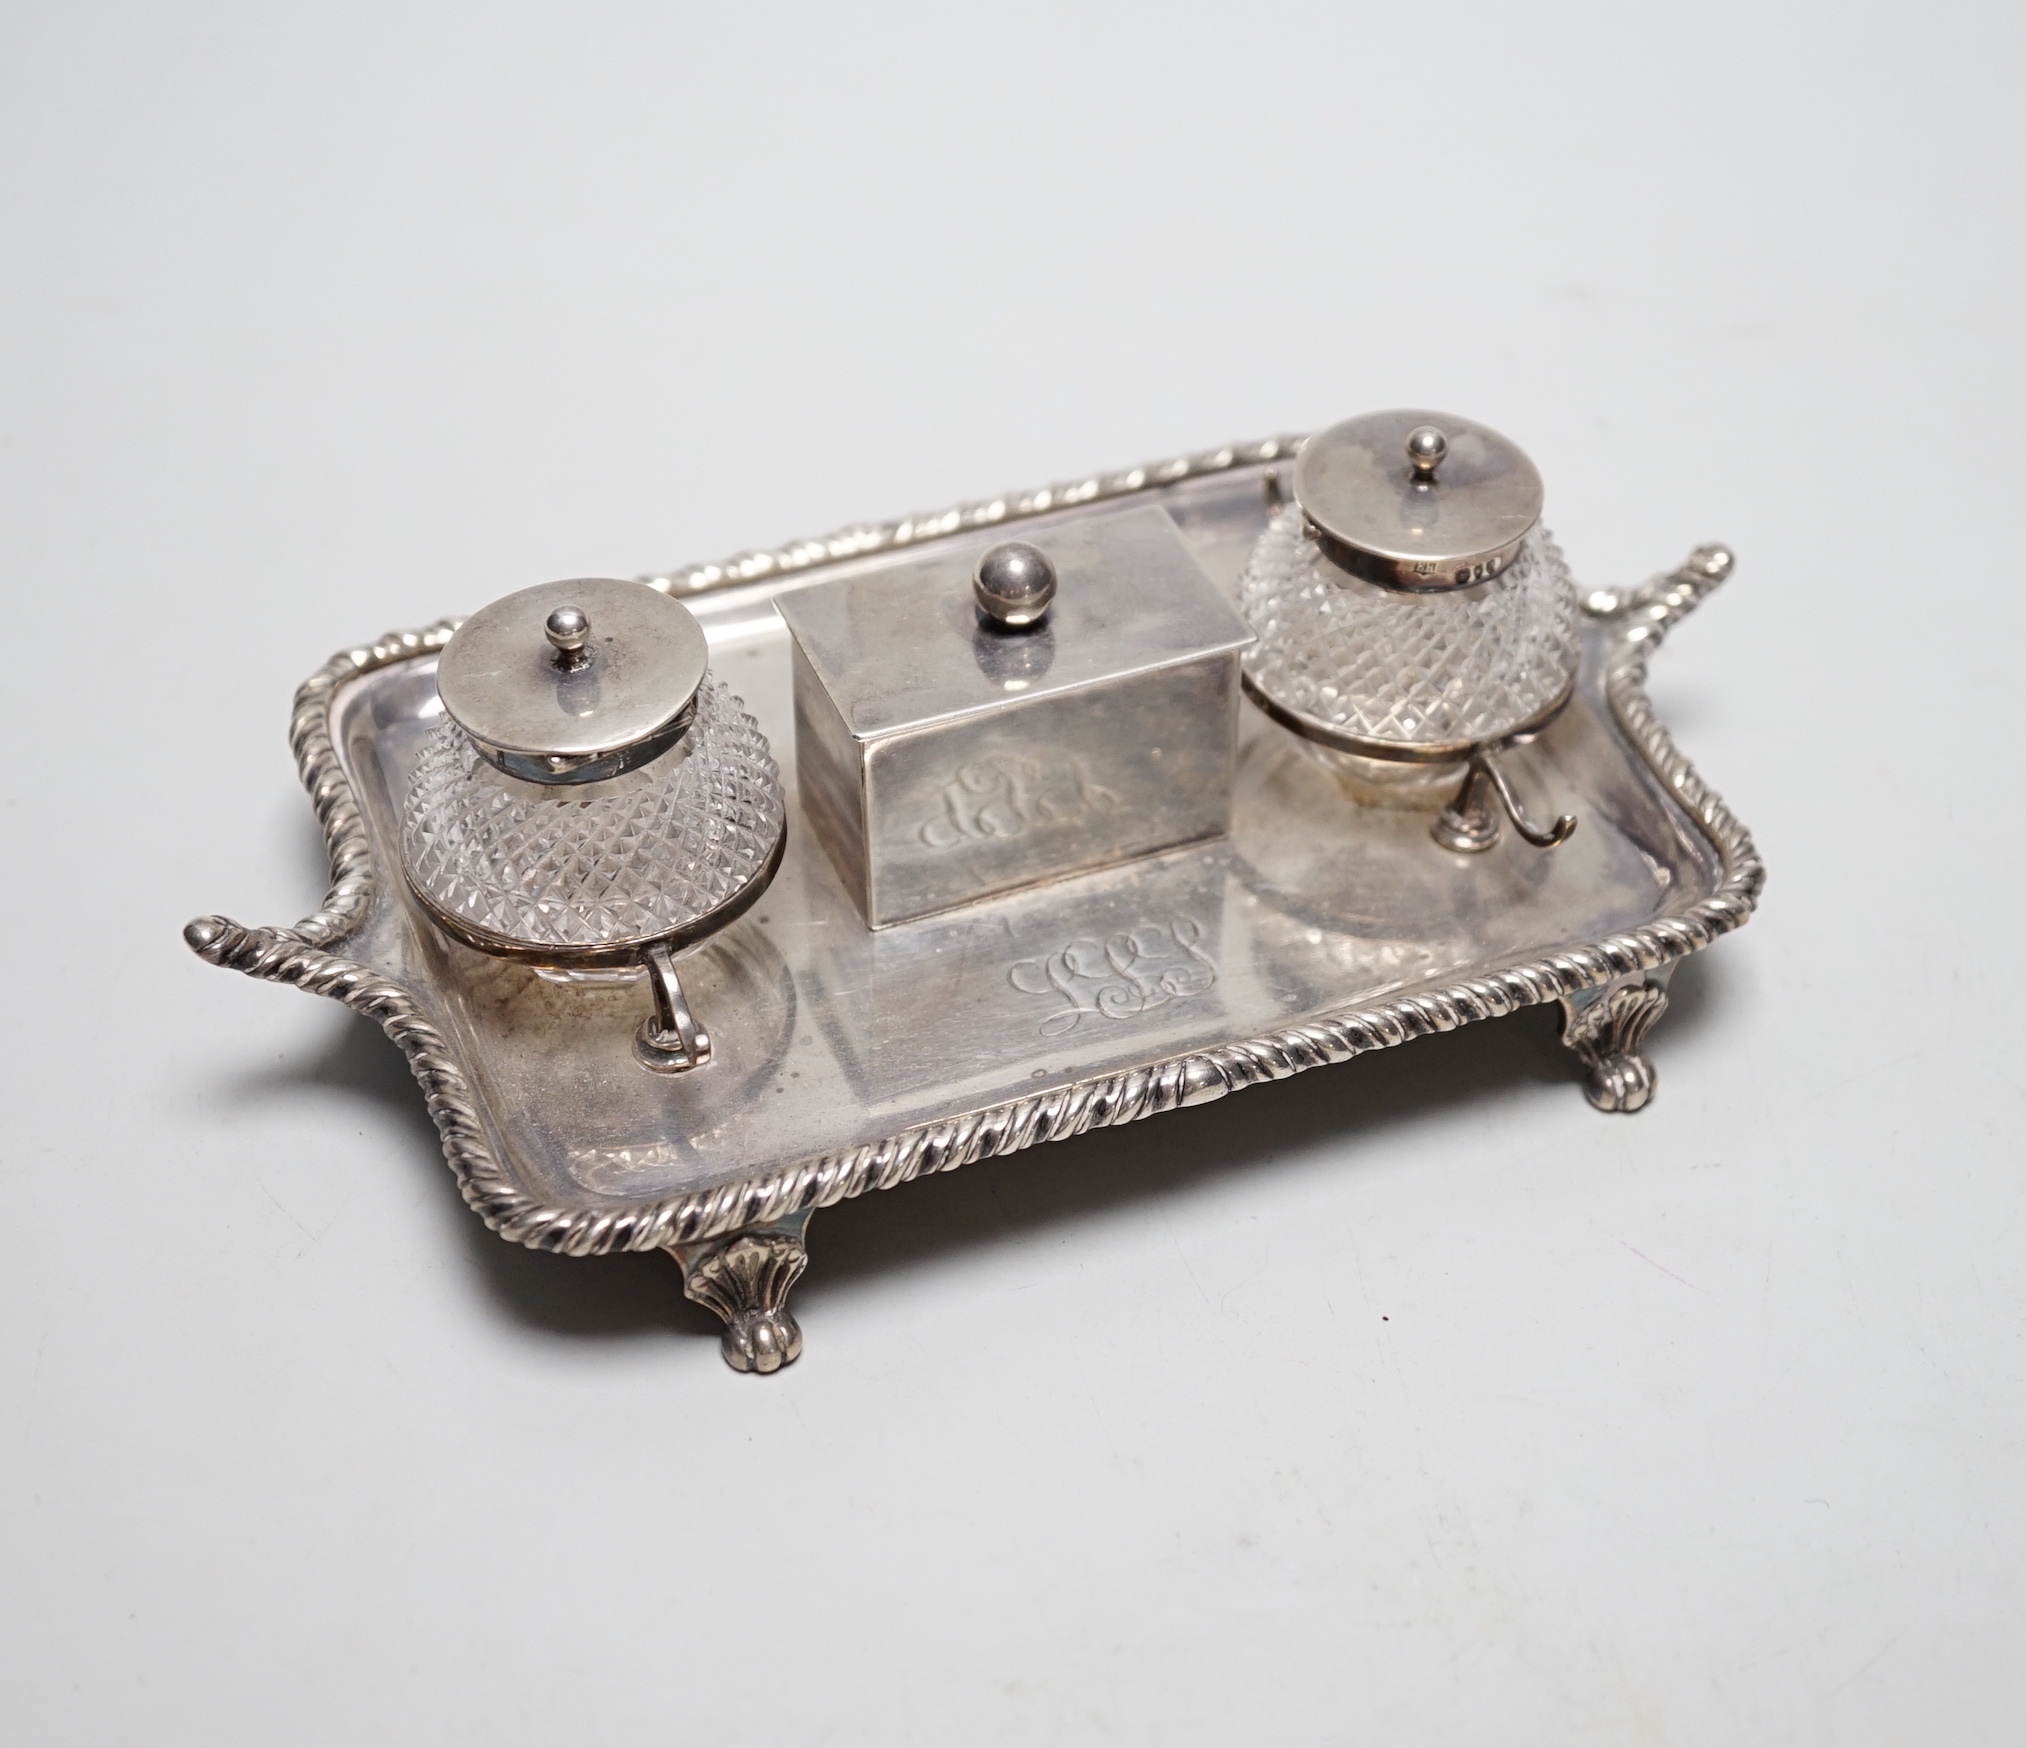 A late Victorian silver rectangular inkstand, with two mounted cut glass wells, central lidded compartment and two pen rests, Edward Hutton, London, 1890, 19cm, weighable silver 9oz.